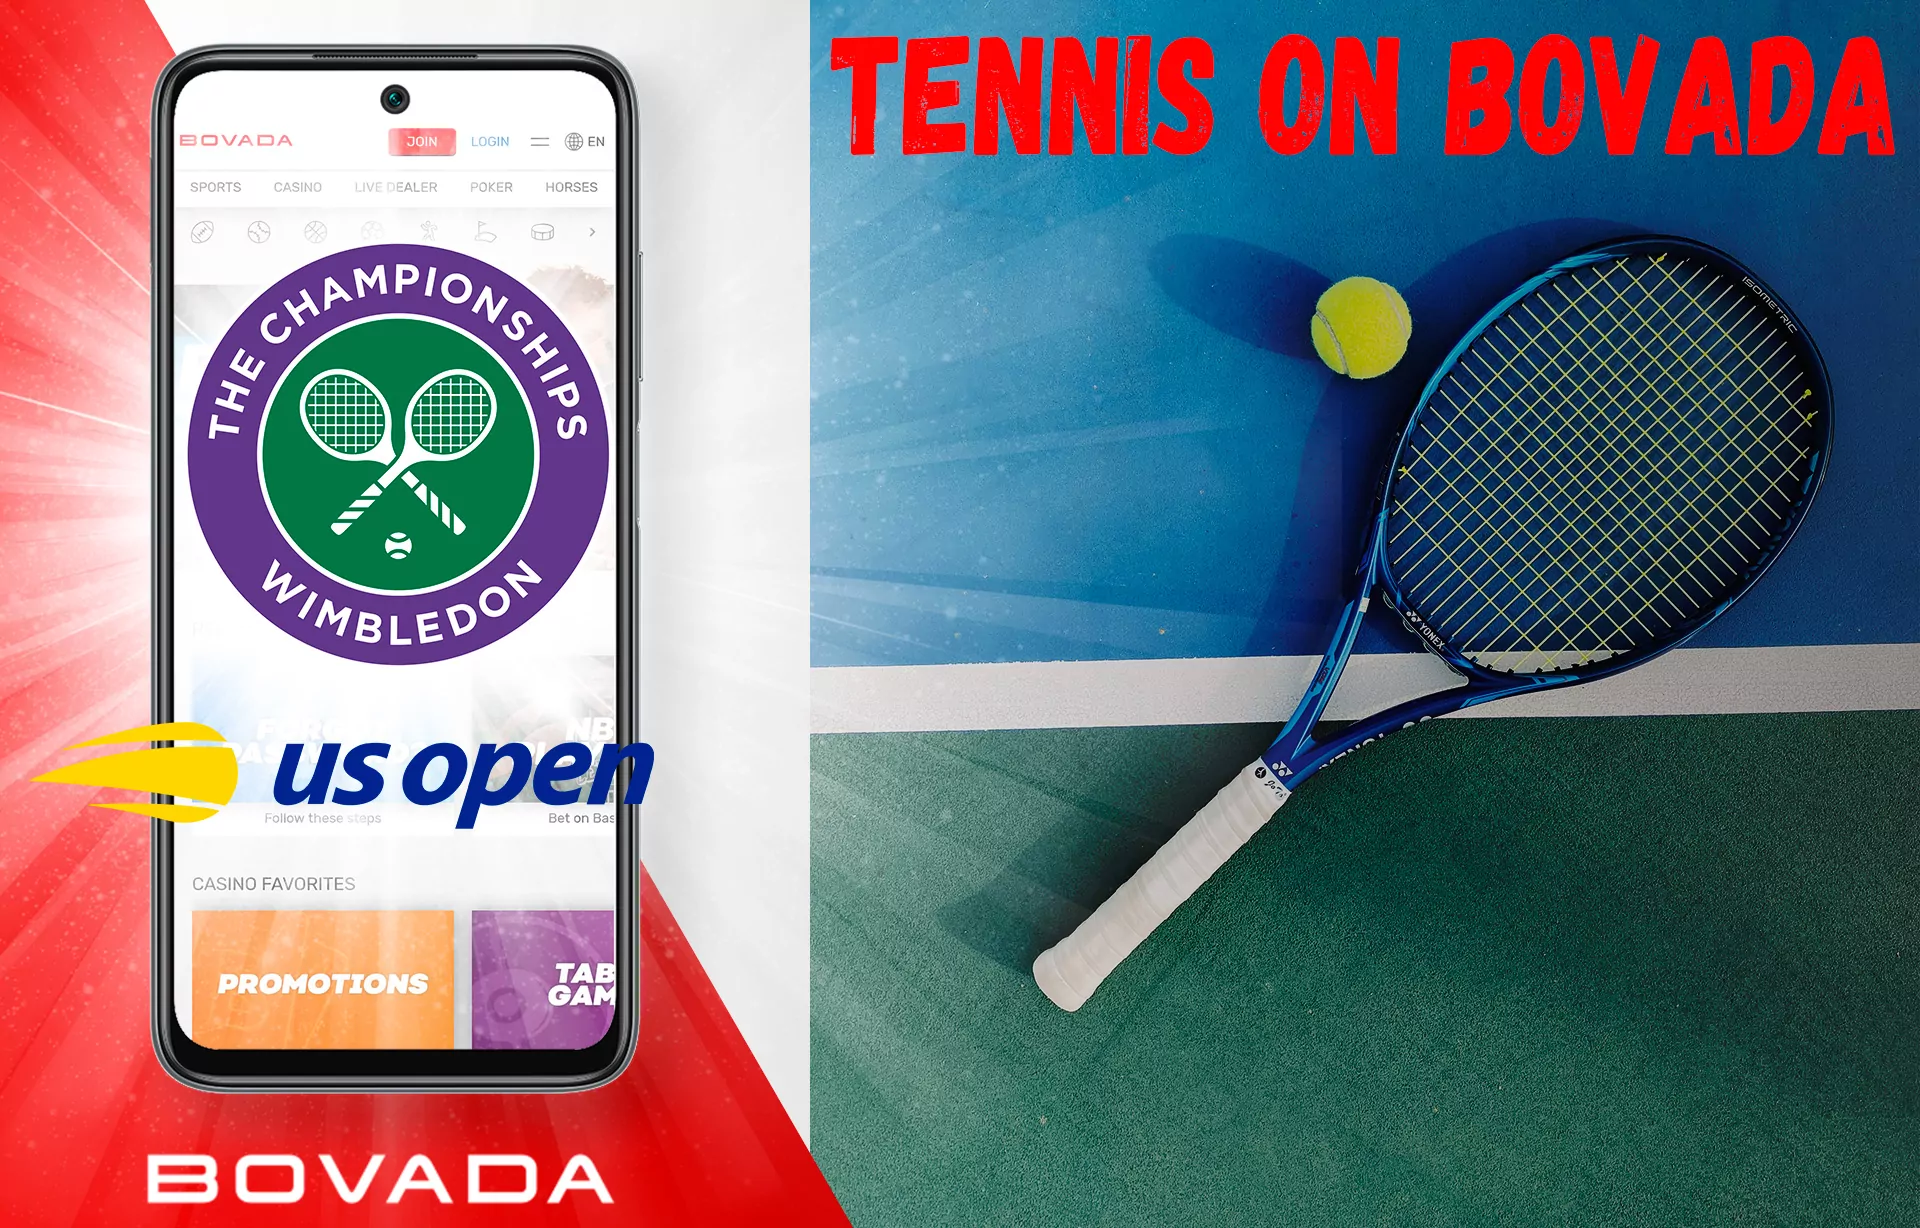 Tennis betting in Bovada includes bets on the winner of the match, total, handicap, Asian handicap and other bets.